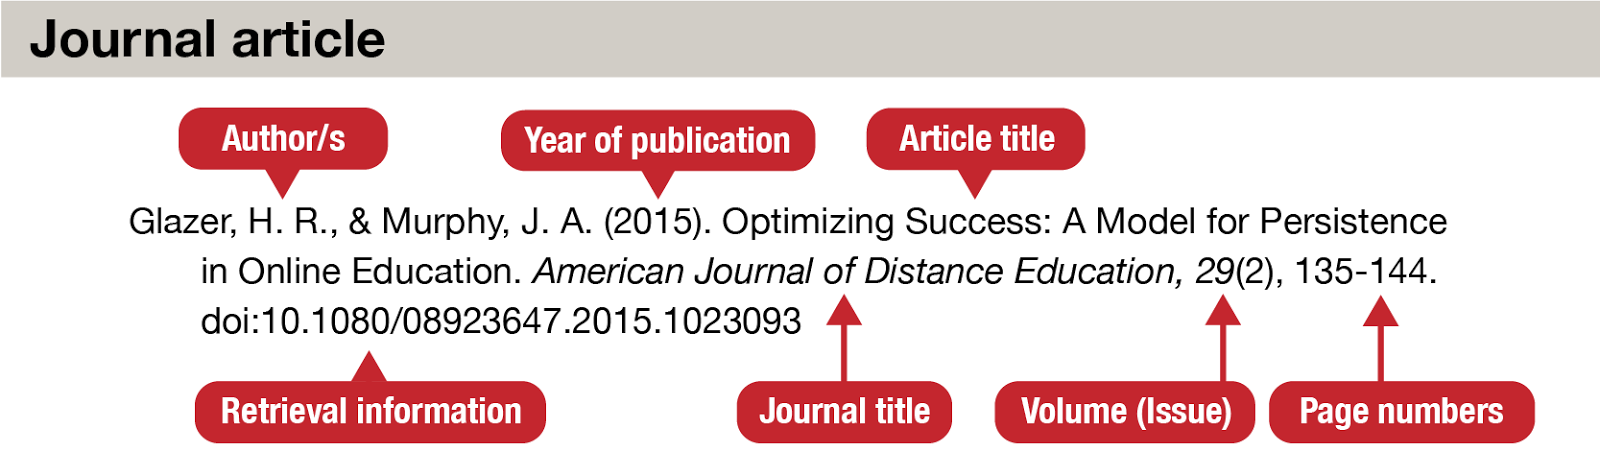 Do only journal articles have DOIs?